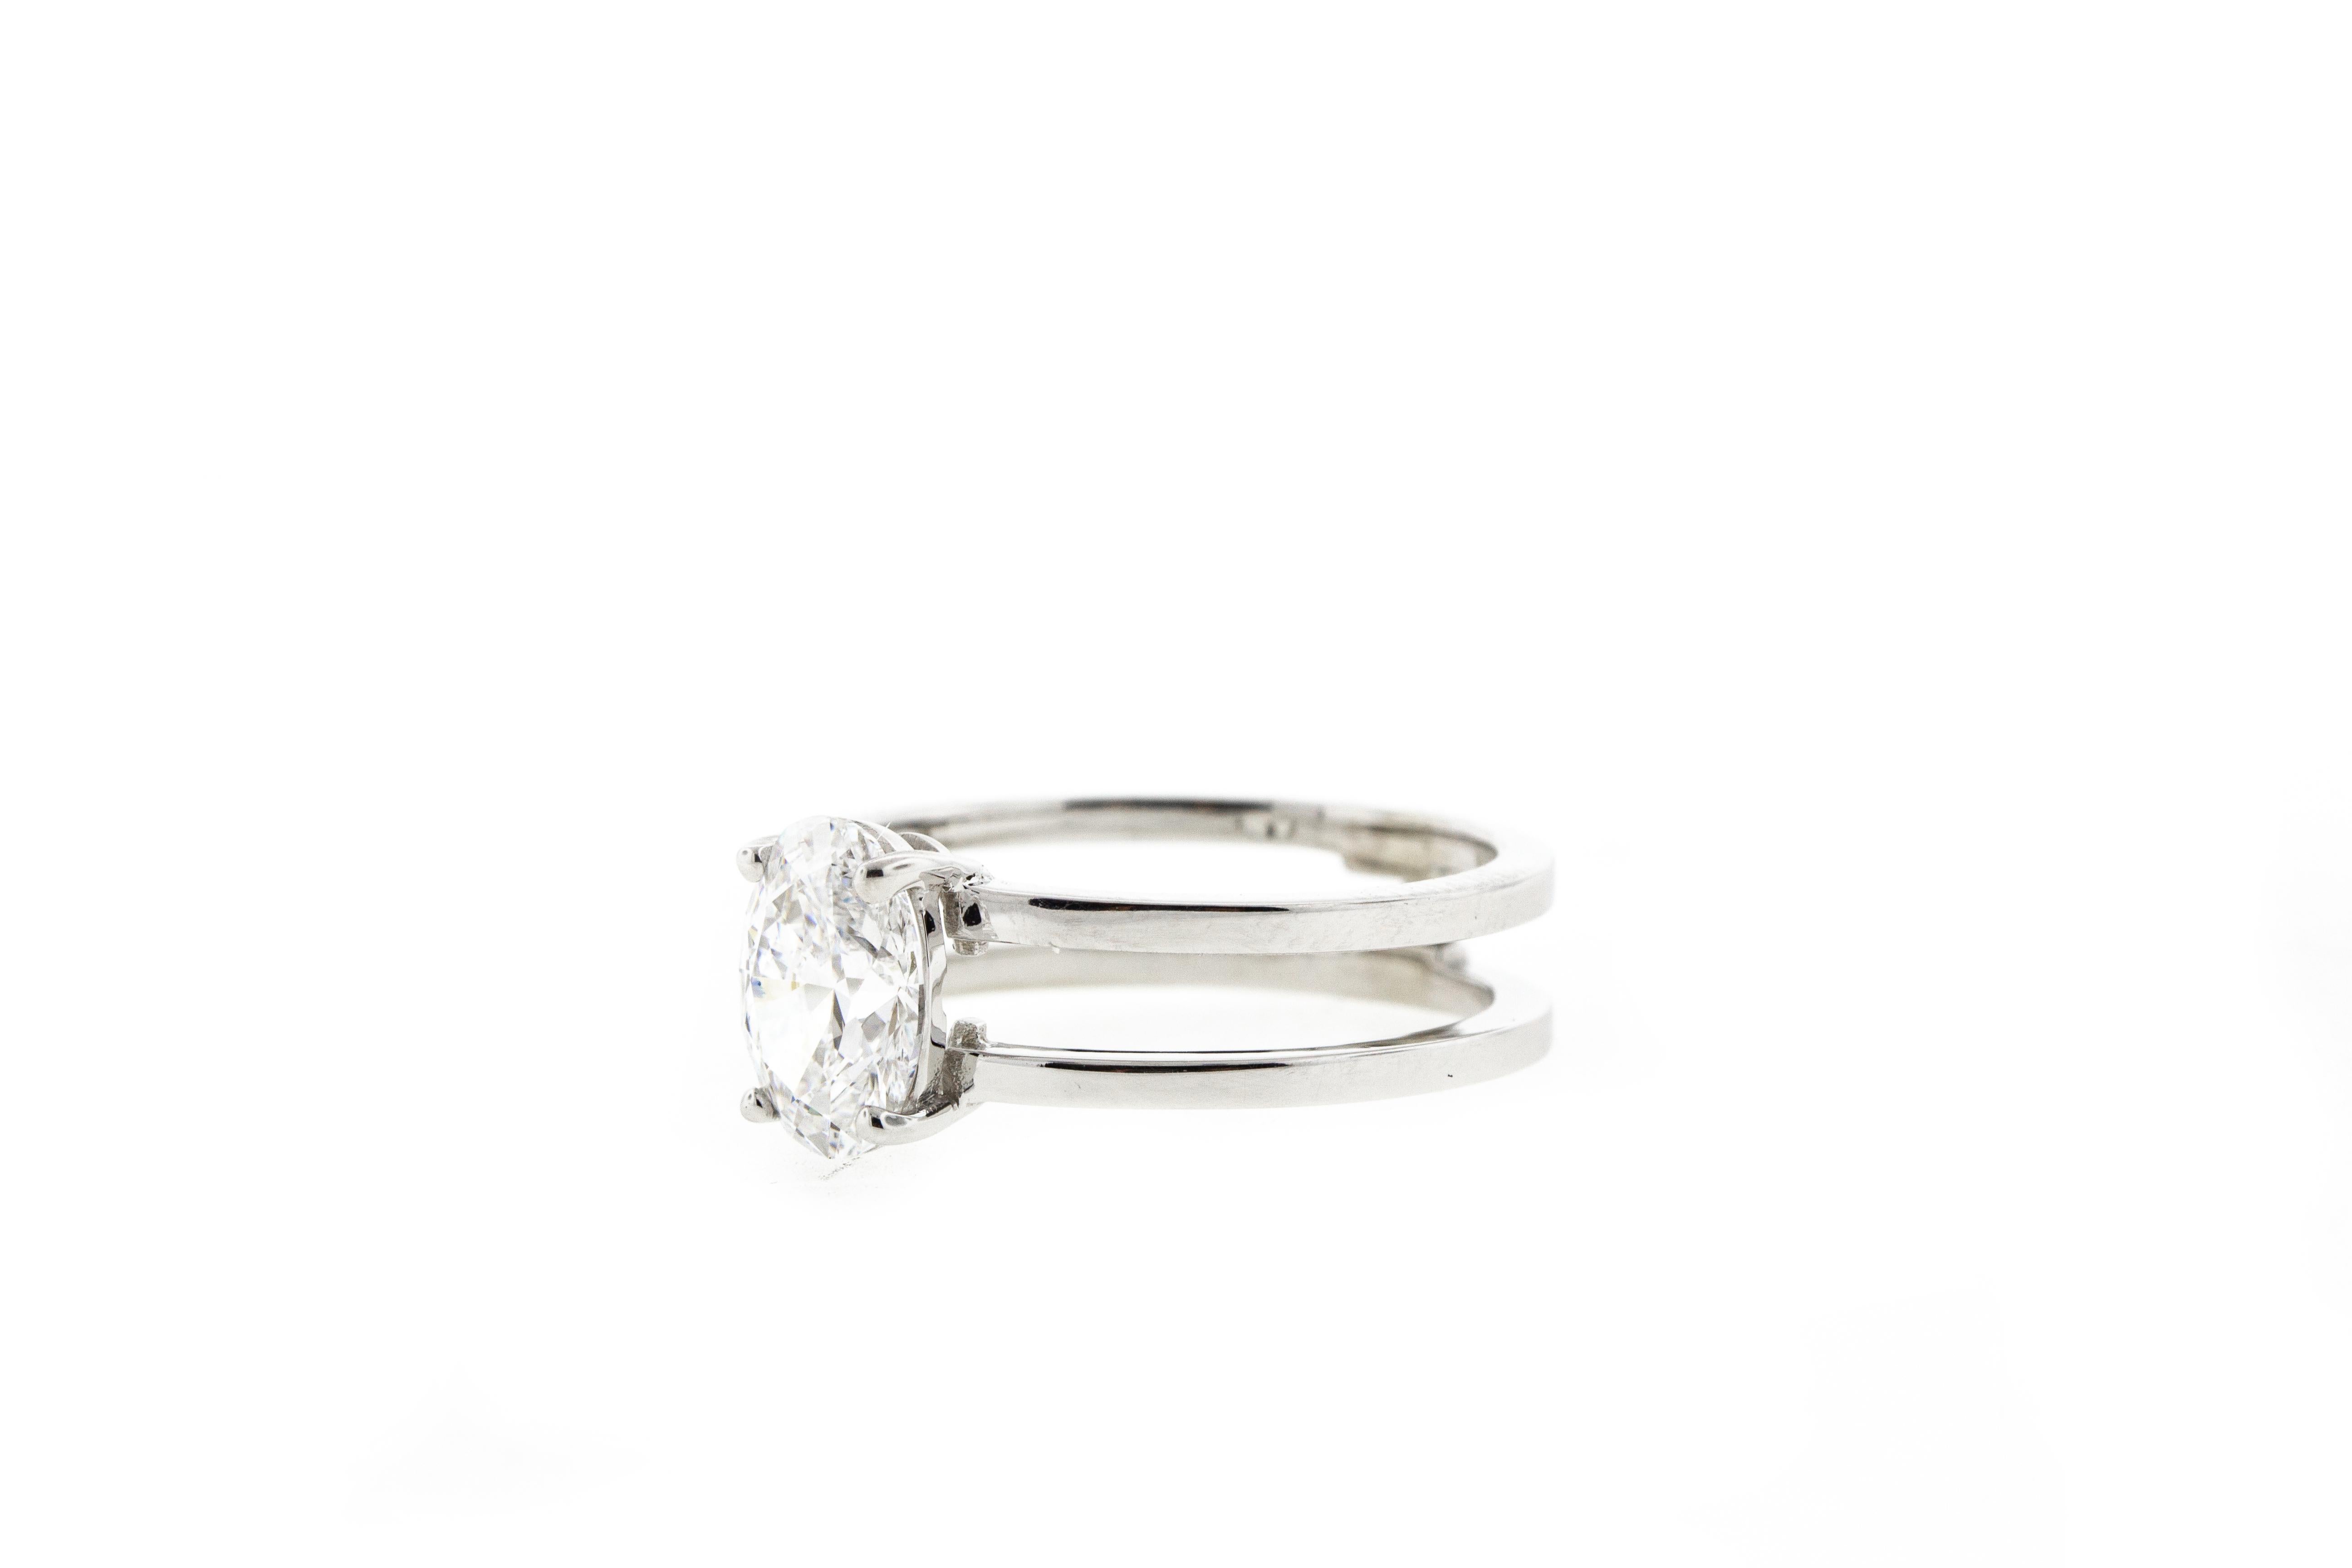 This double band oval engagement ring is one of the most popular engagement ring trends of late according to InStyle magazine. This style can be replicated with any center stone and in any color gold or platinum. Depending on the center stone,